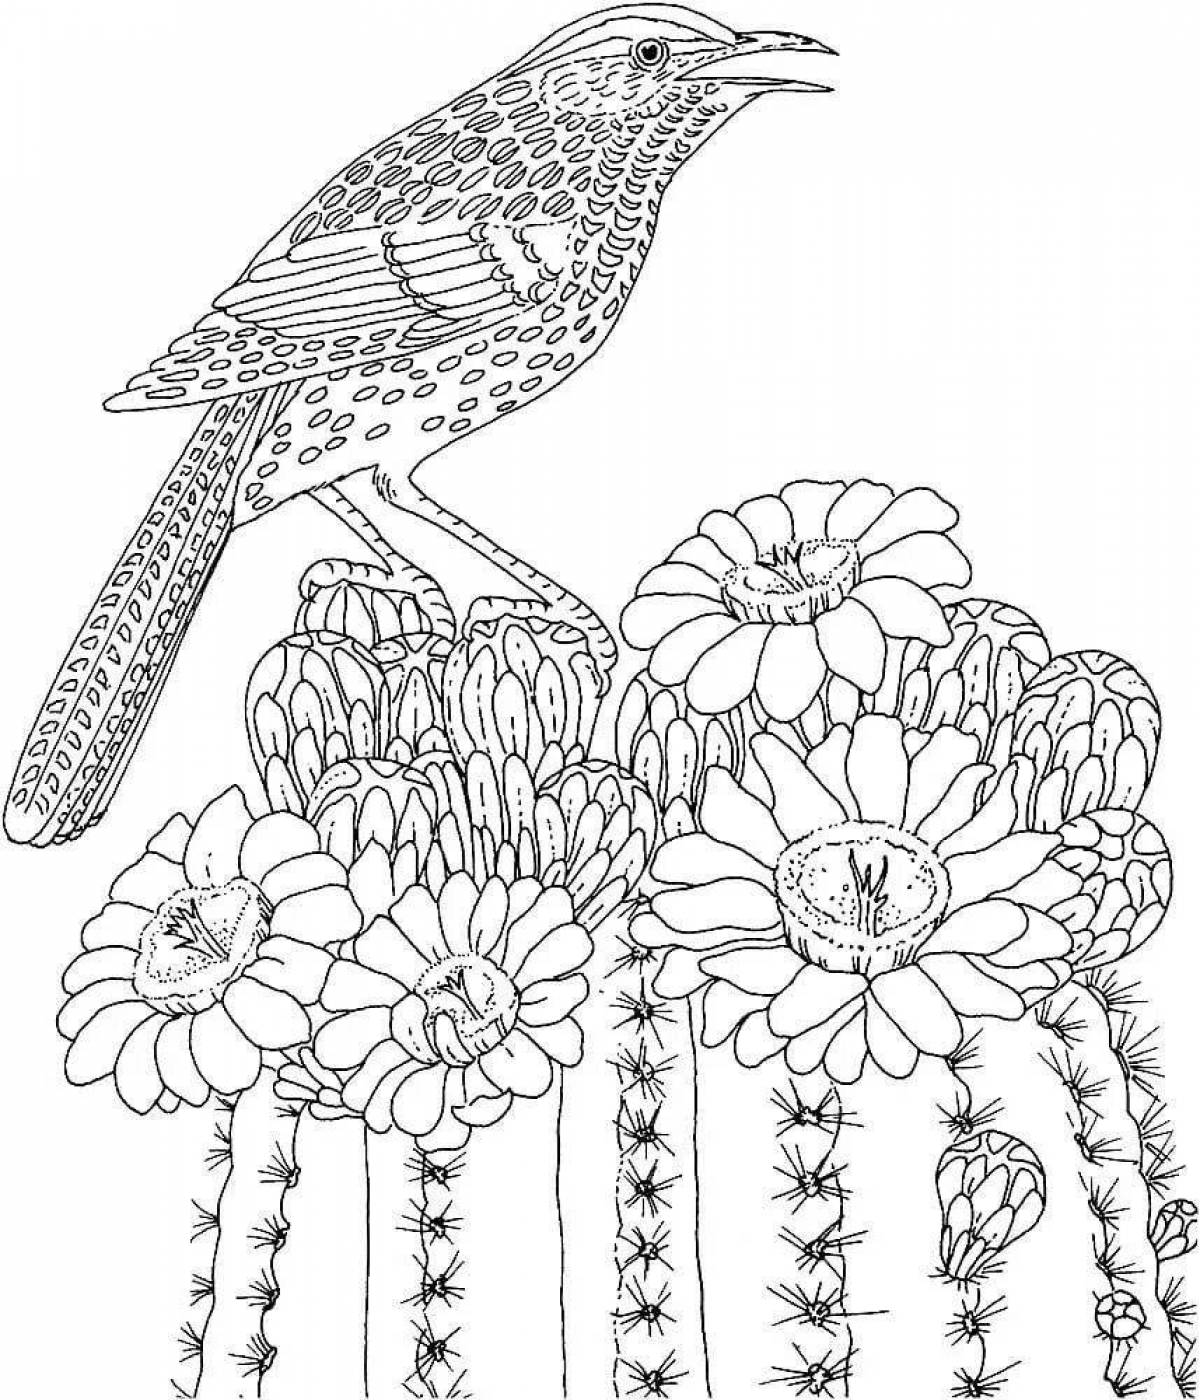 Exquisite intricate flower coloring book